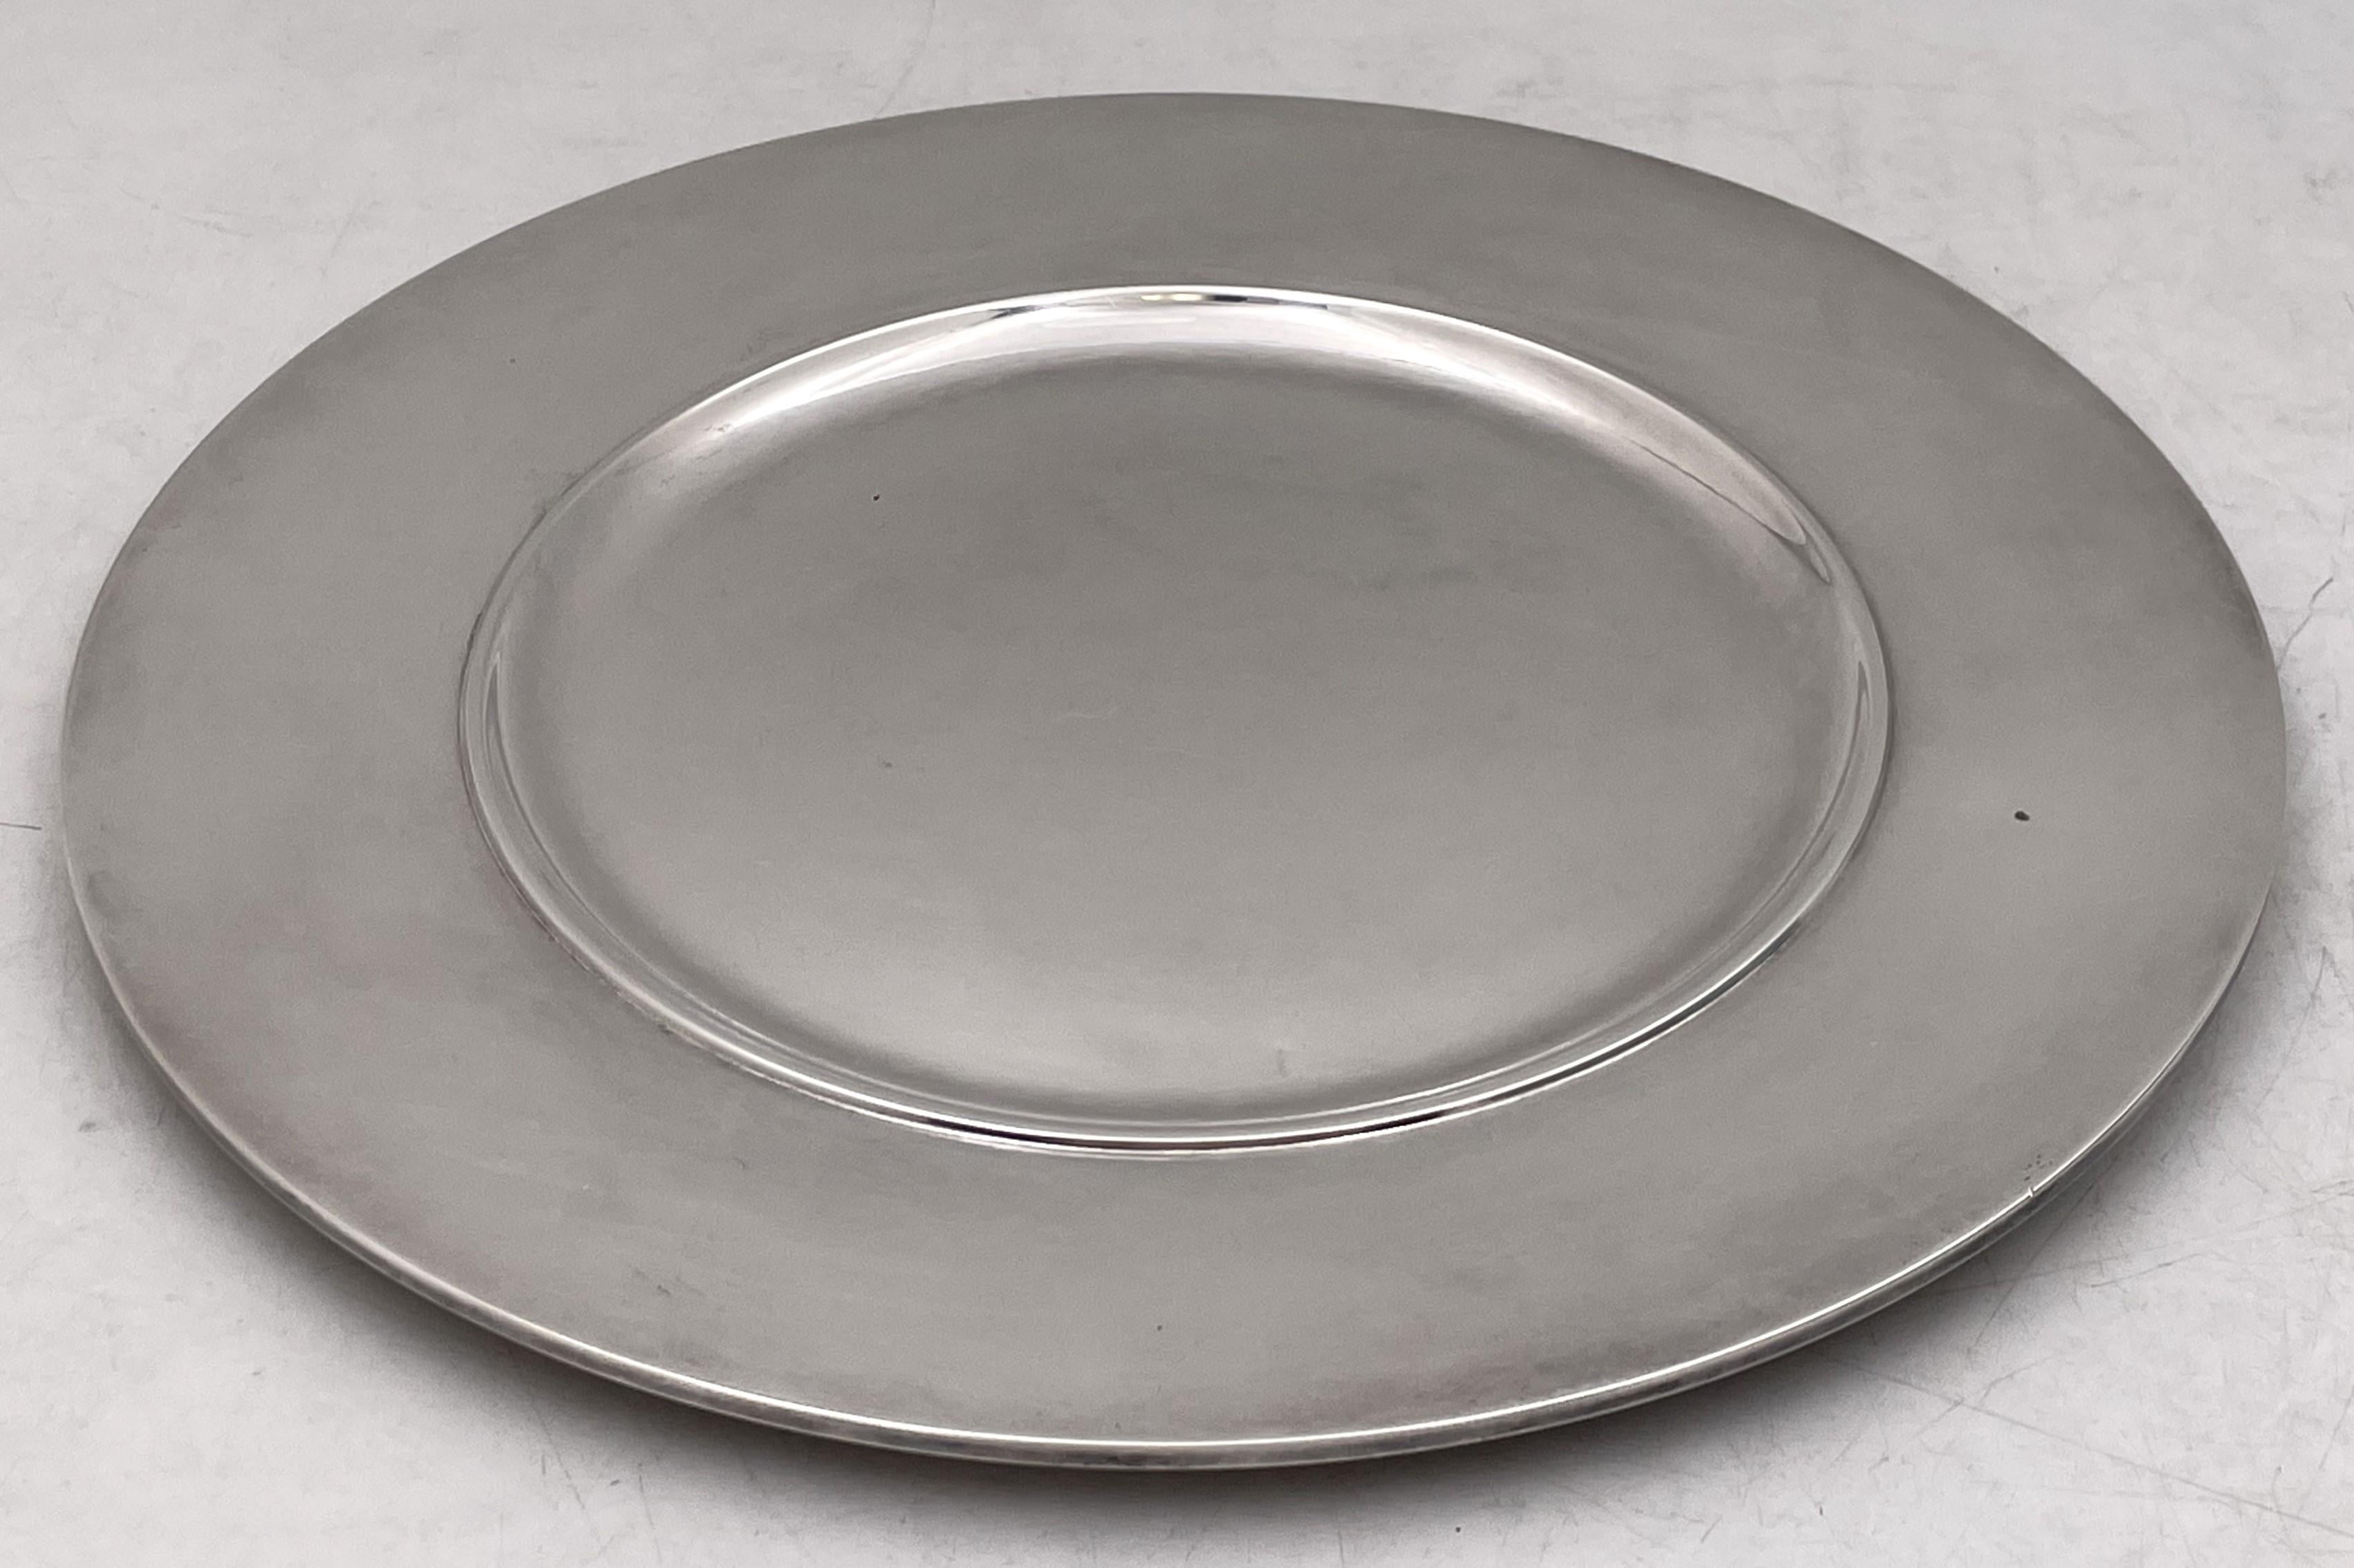 Georg Jensen sterling silver finely hand-hammered plate or charger, designed by Johan Rohde circa 1929, in pattern number 587C, made in the 1930s and in Art Deco style in an elegant, geometric design. It measures 11'' in diameter (inner diameter is